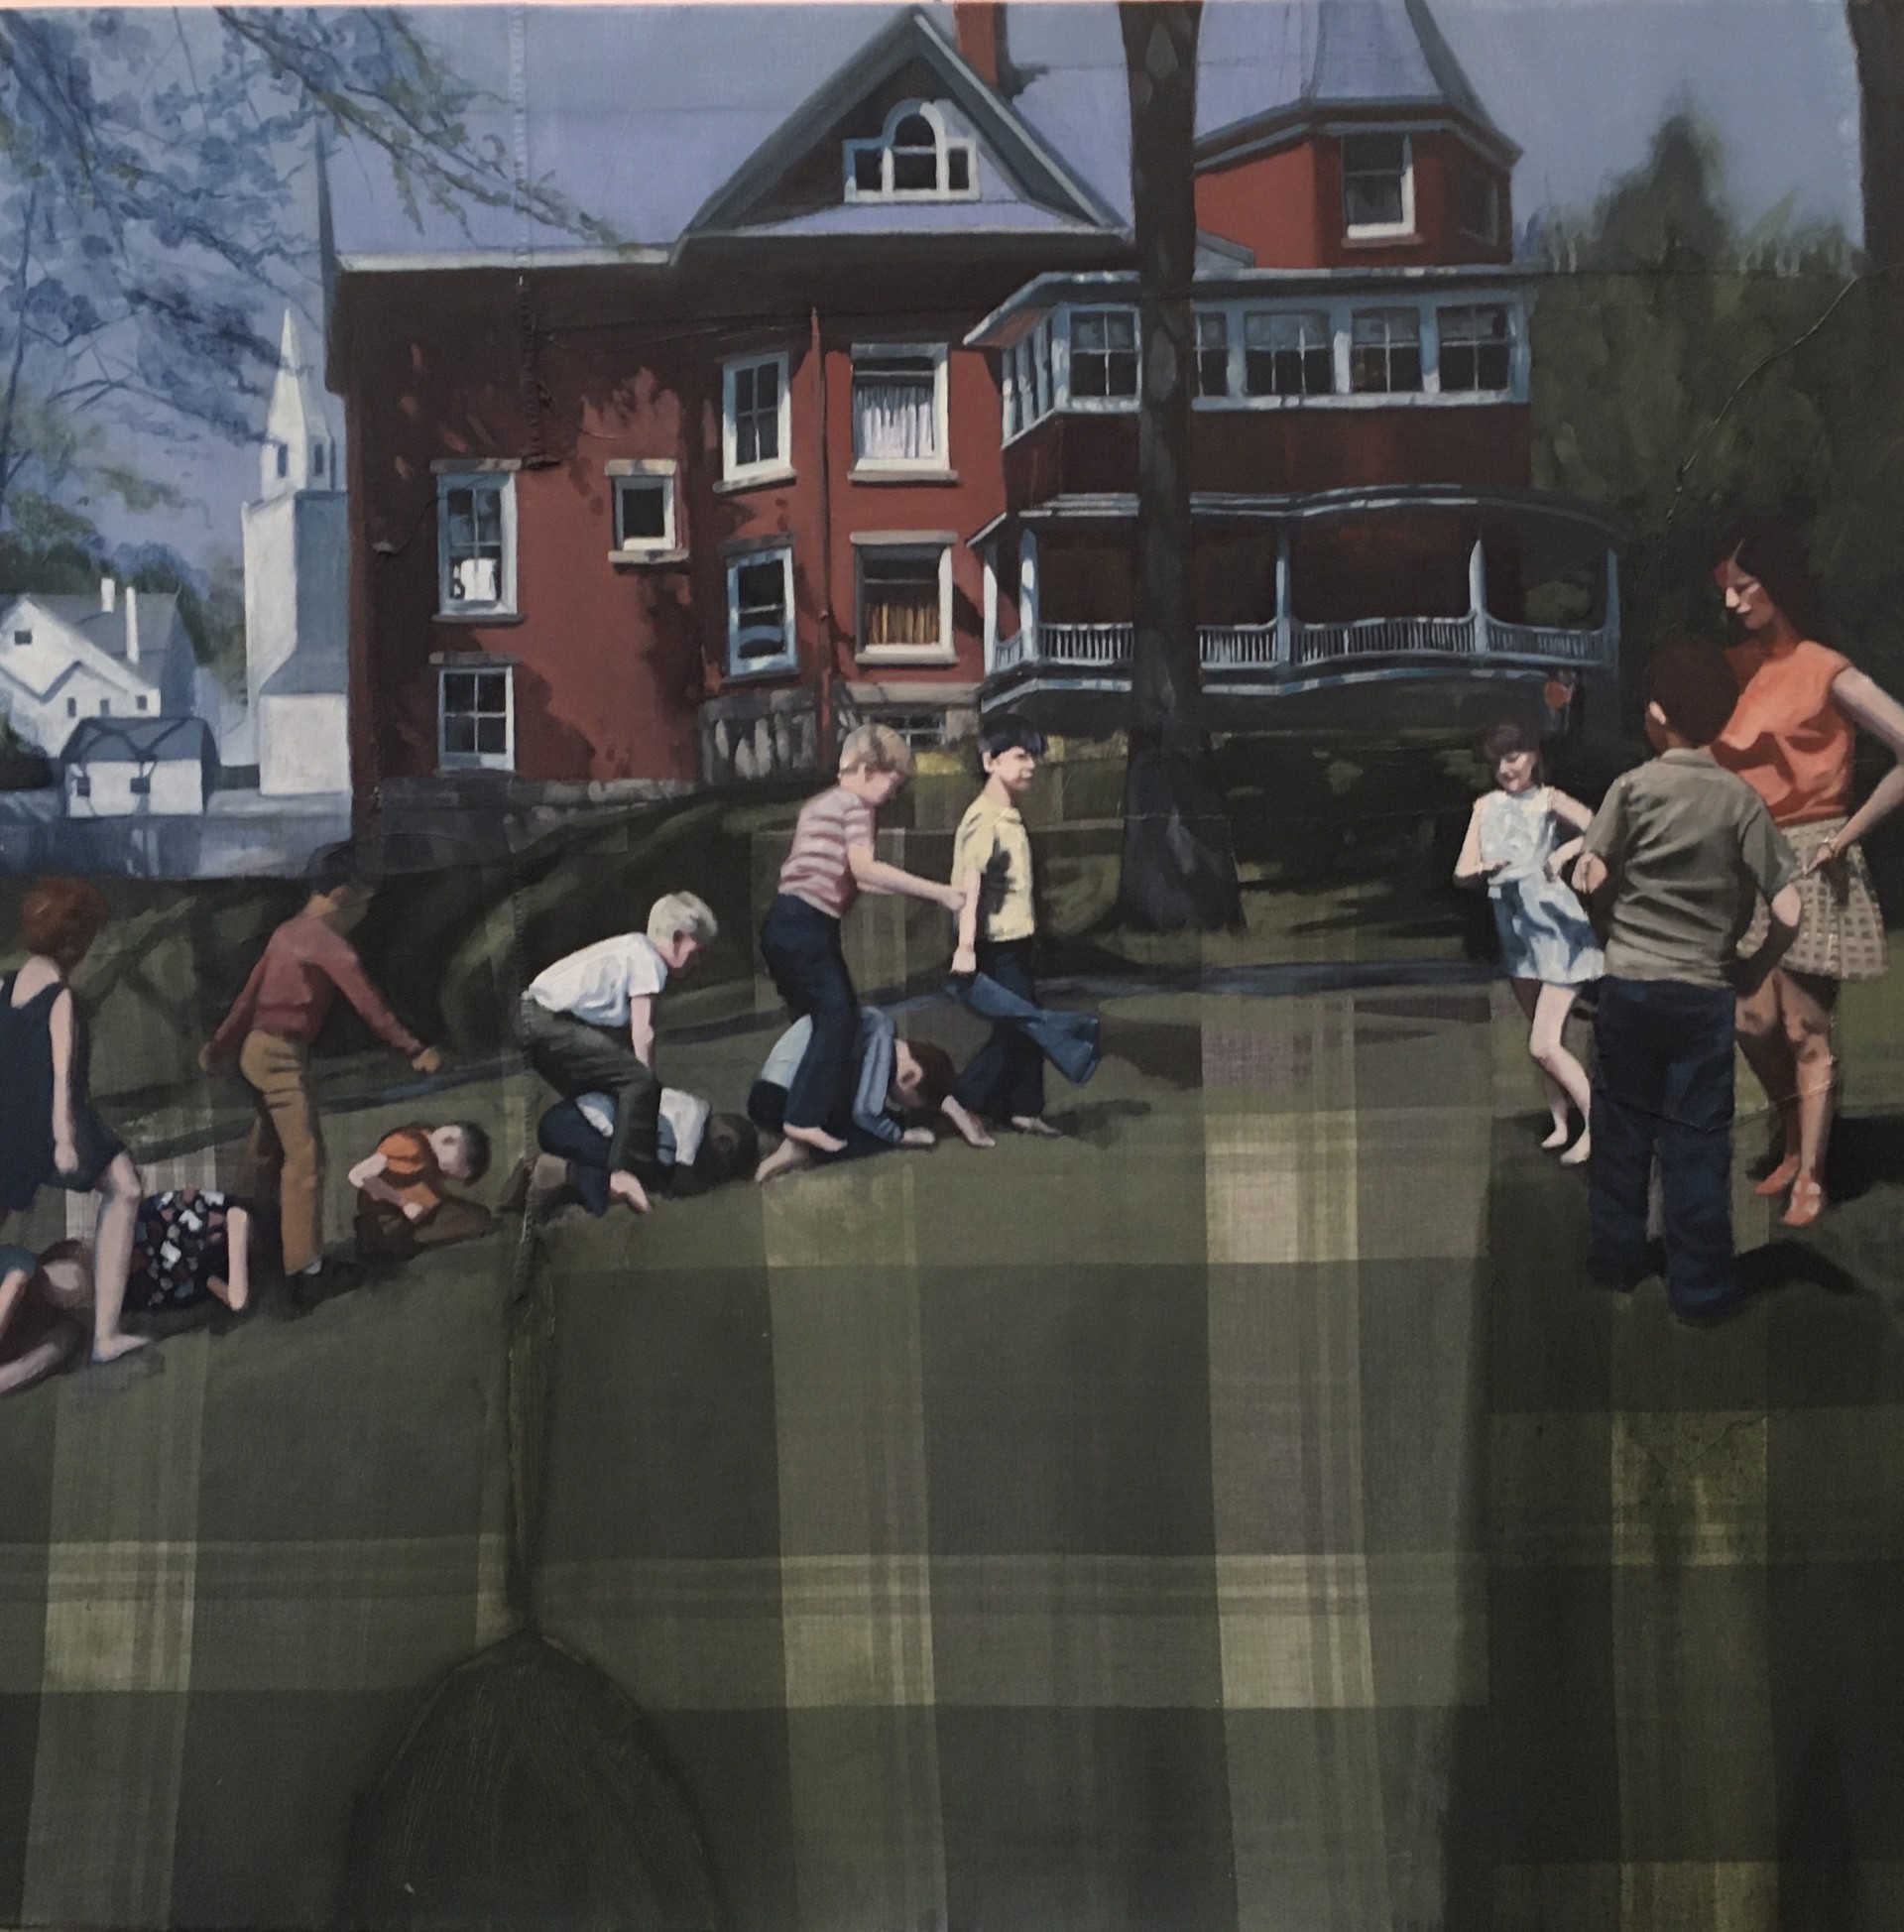 Kids on the Lawn by Sara Marcheli